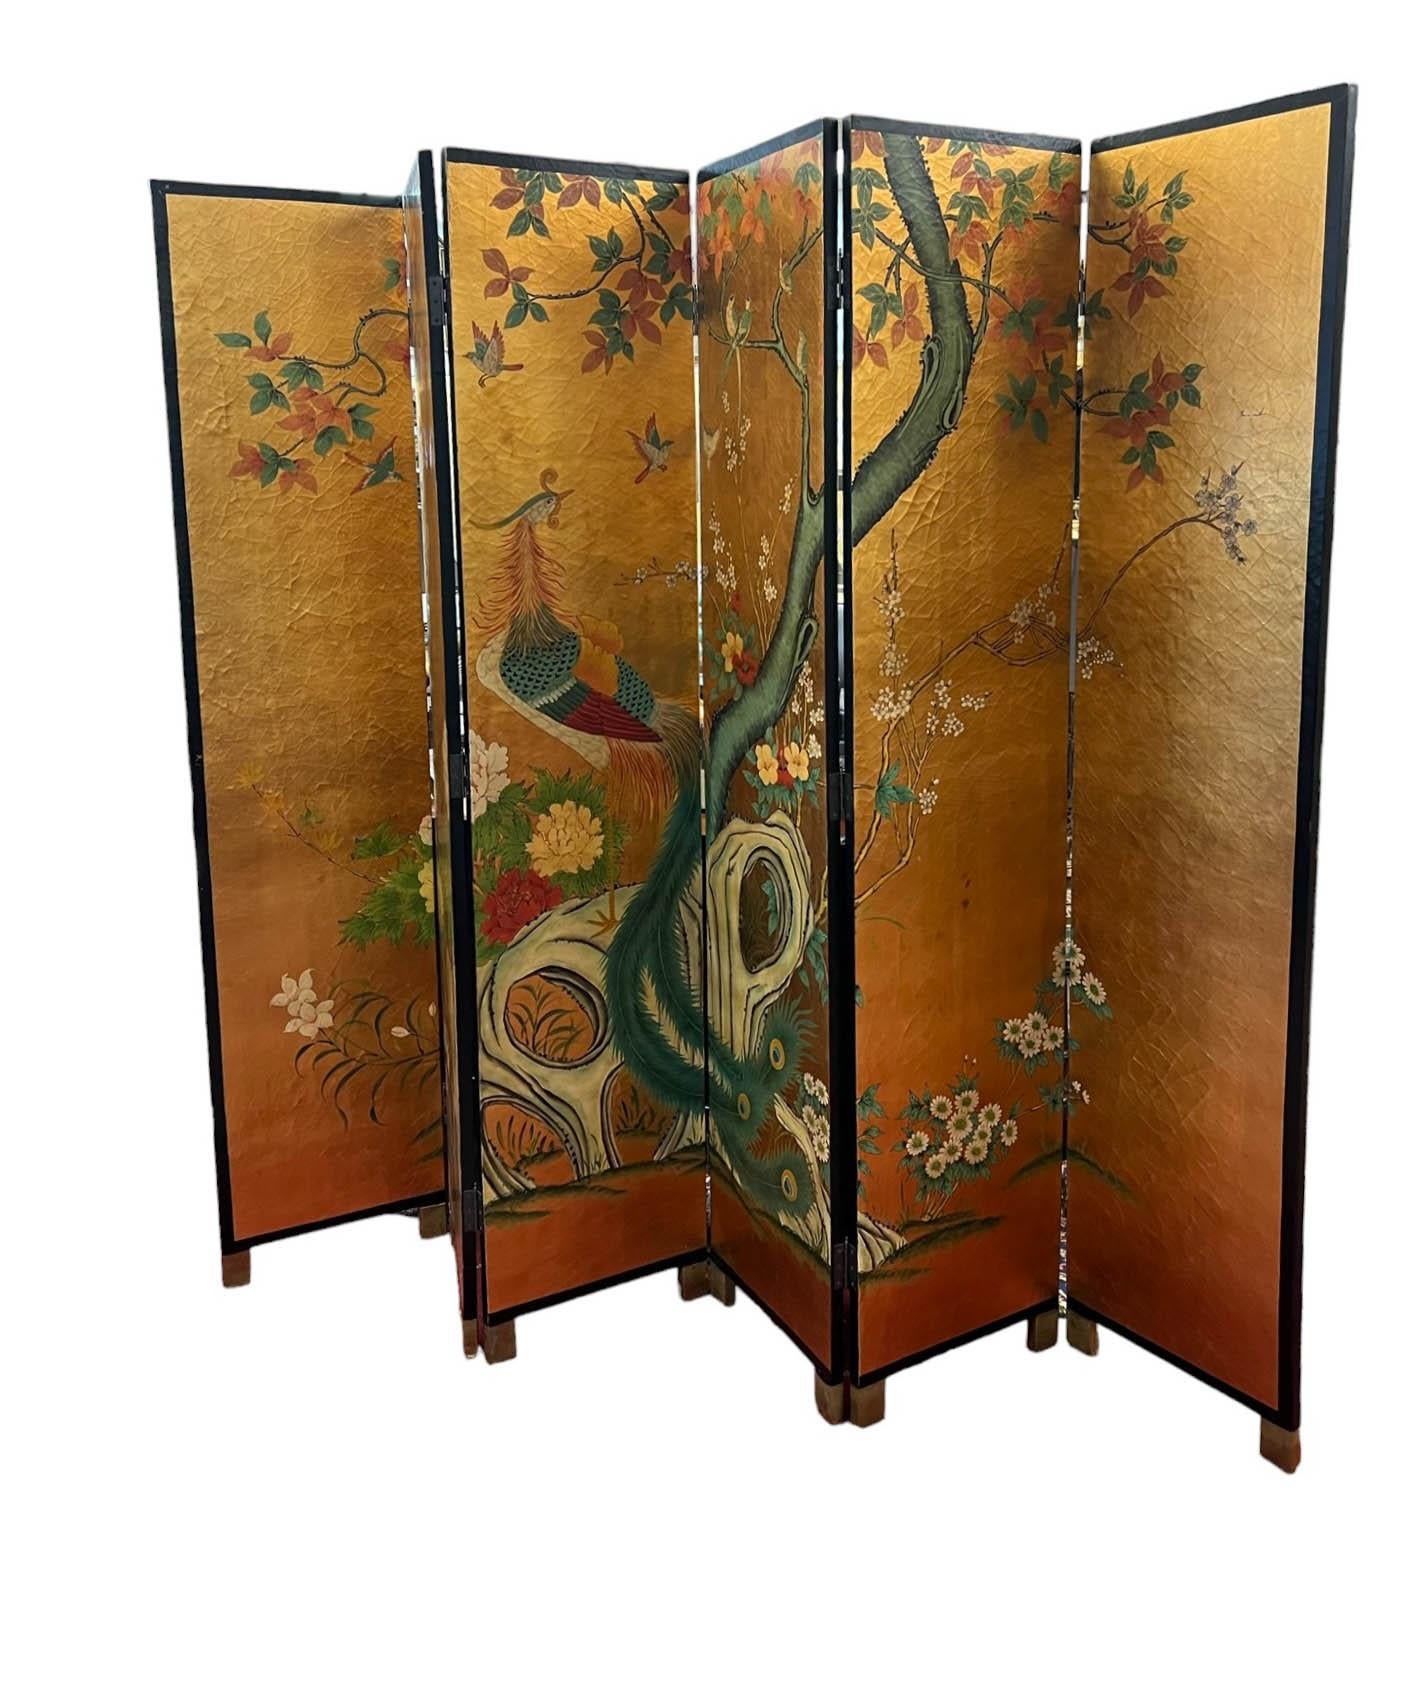 Large Asian 6-panel folding screen. The screen stands seven feet tall and could be used in a multitude of applications. The front of the screen is finished in a crackled gold, depicting a large peacock in its center, smaller birds on branches up